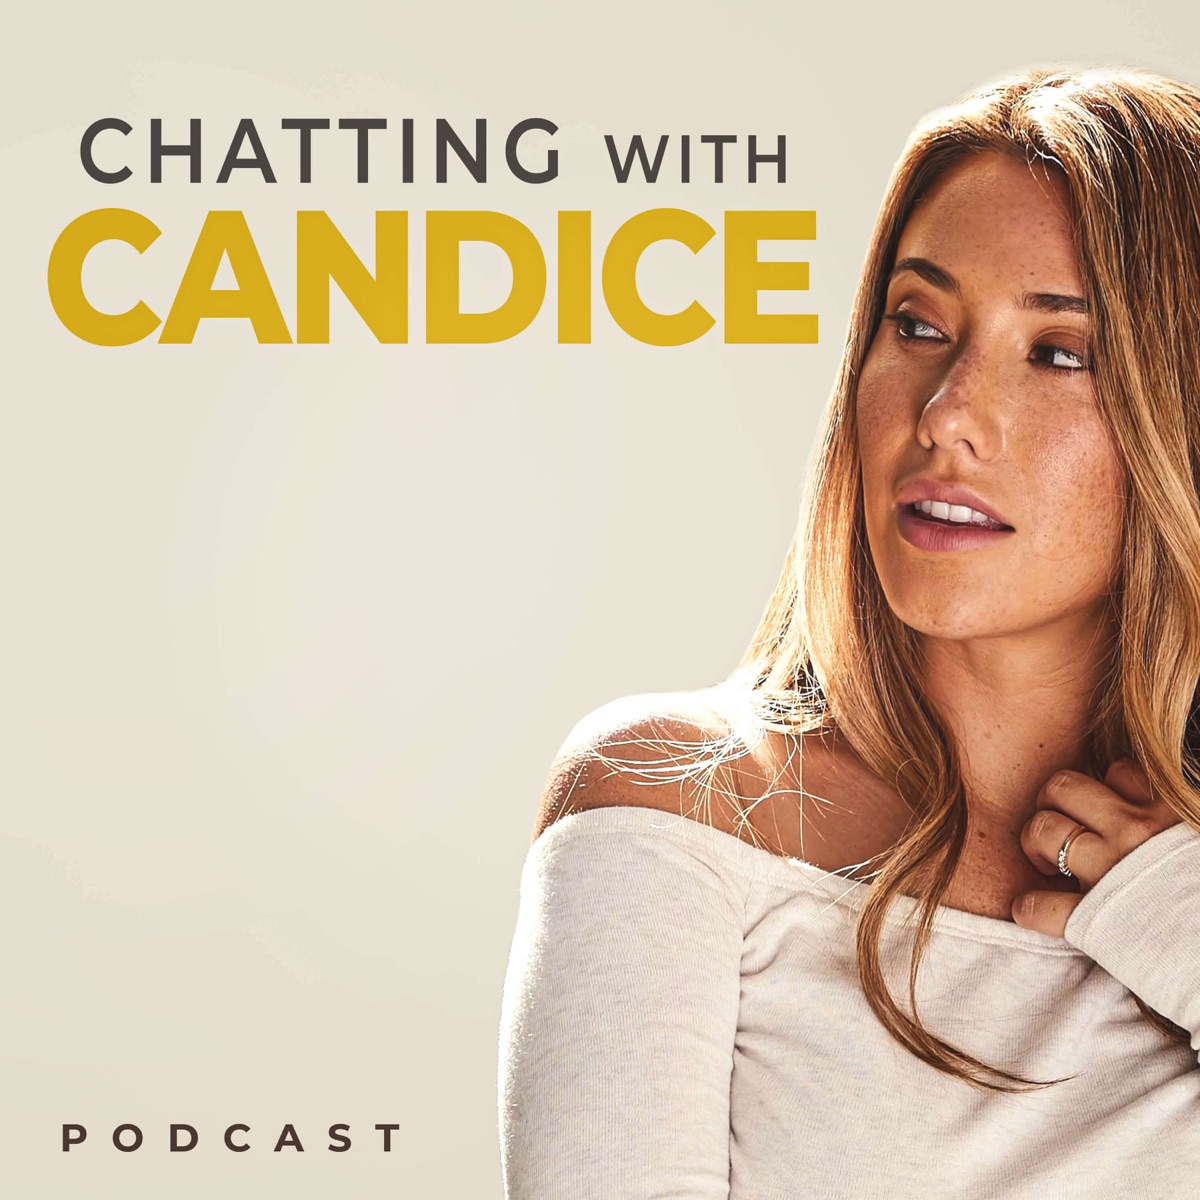 Chatting with Candice – Podcast